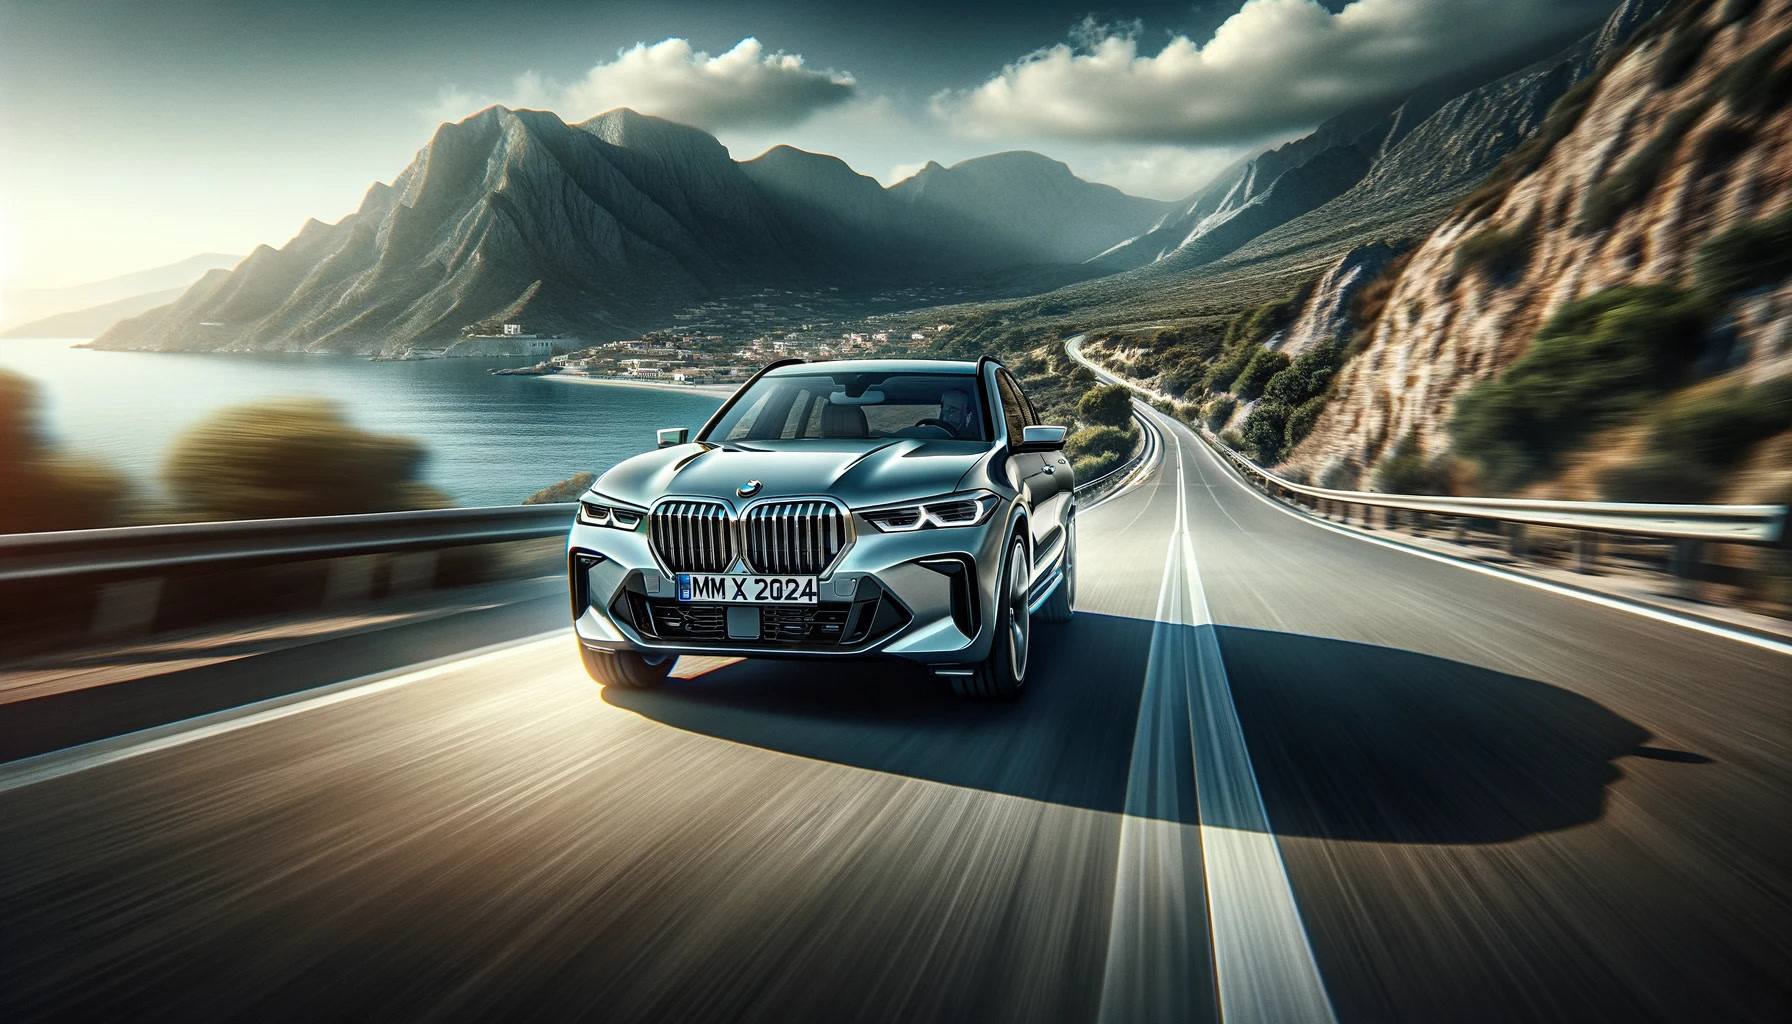 The BMW XM Label 2024 driving on a scenic road emphasizing its handling and performance